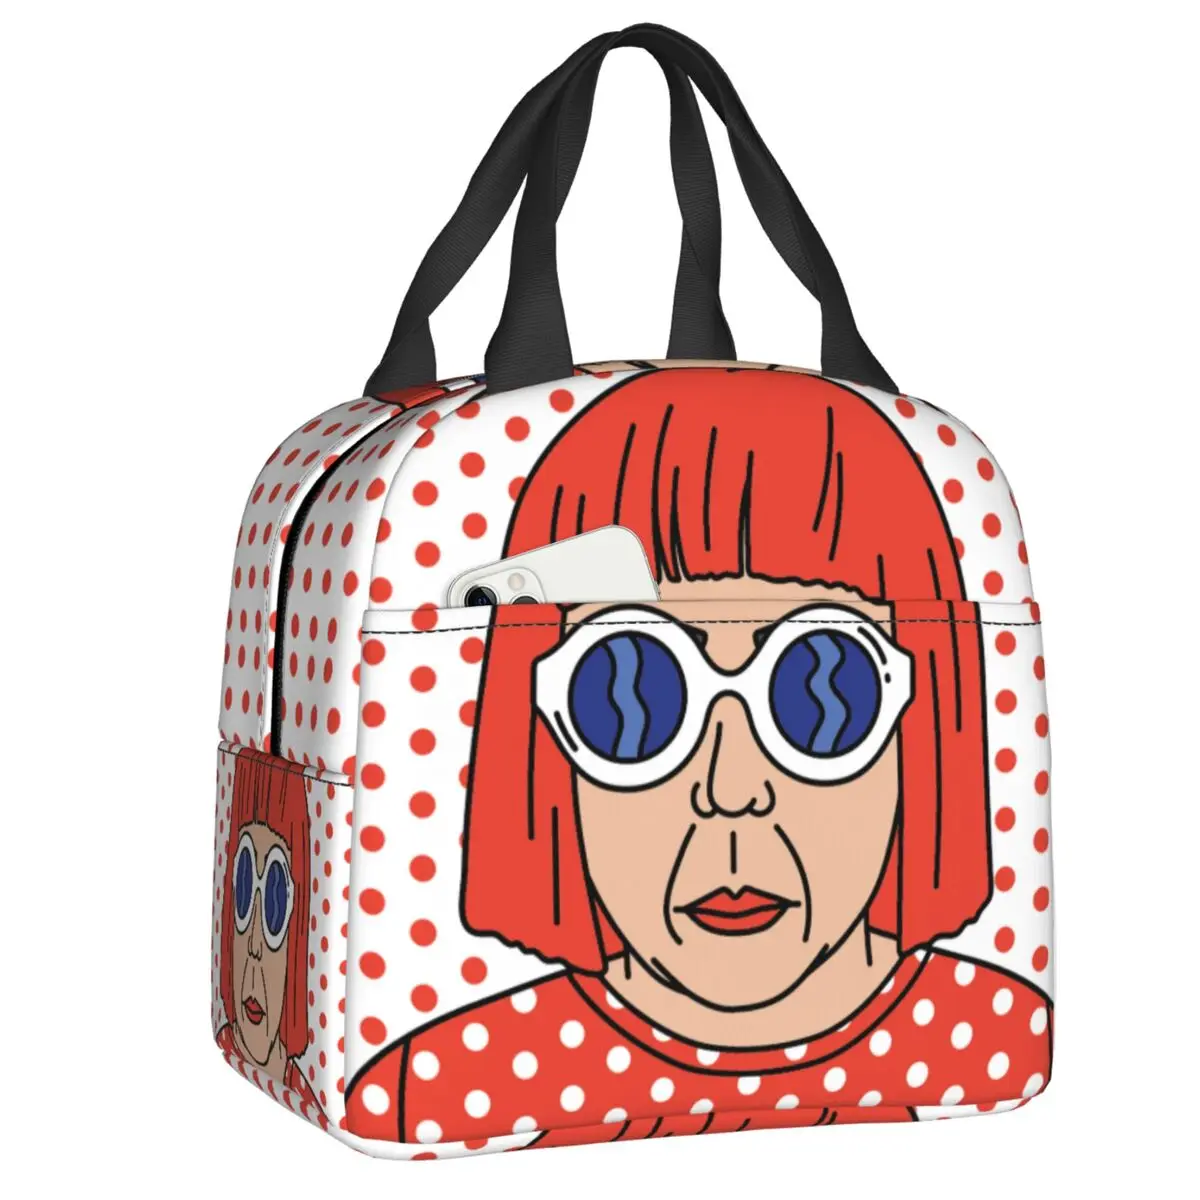 

Yayoi Kusama Self Portrait Insulated Lunch Bag for School Office Resuable Cooler Thermal Lunch Box Women Kids Picnic Food Tote